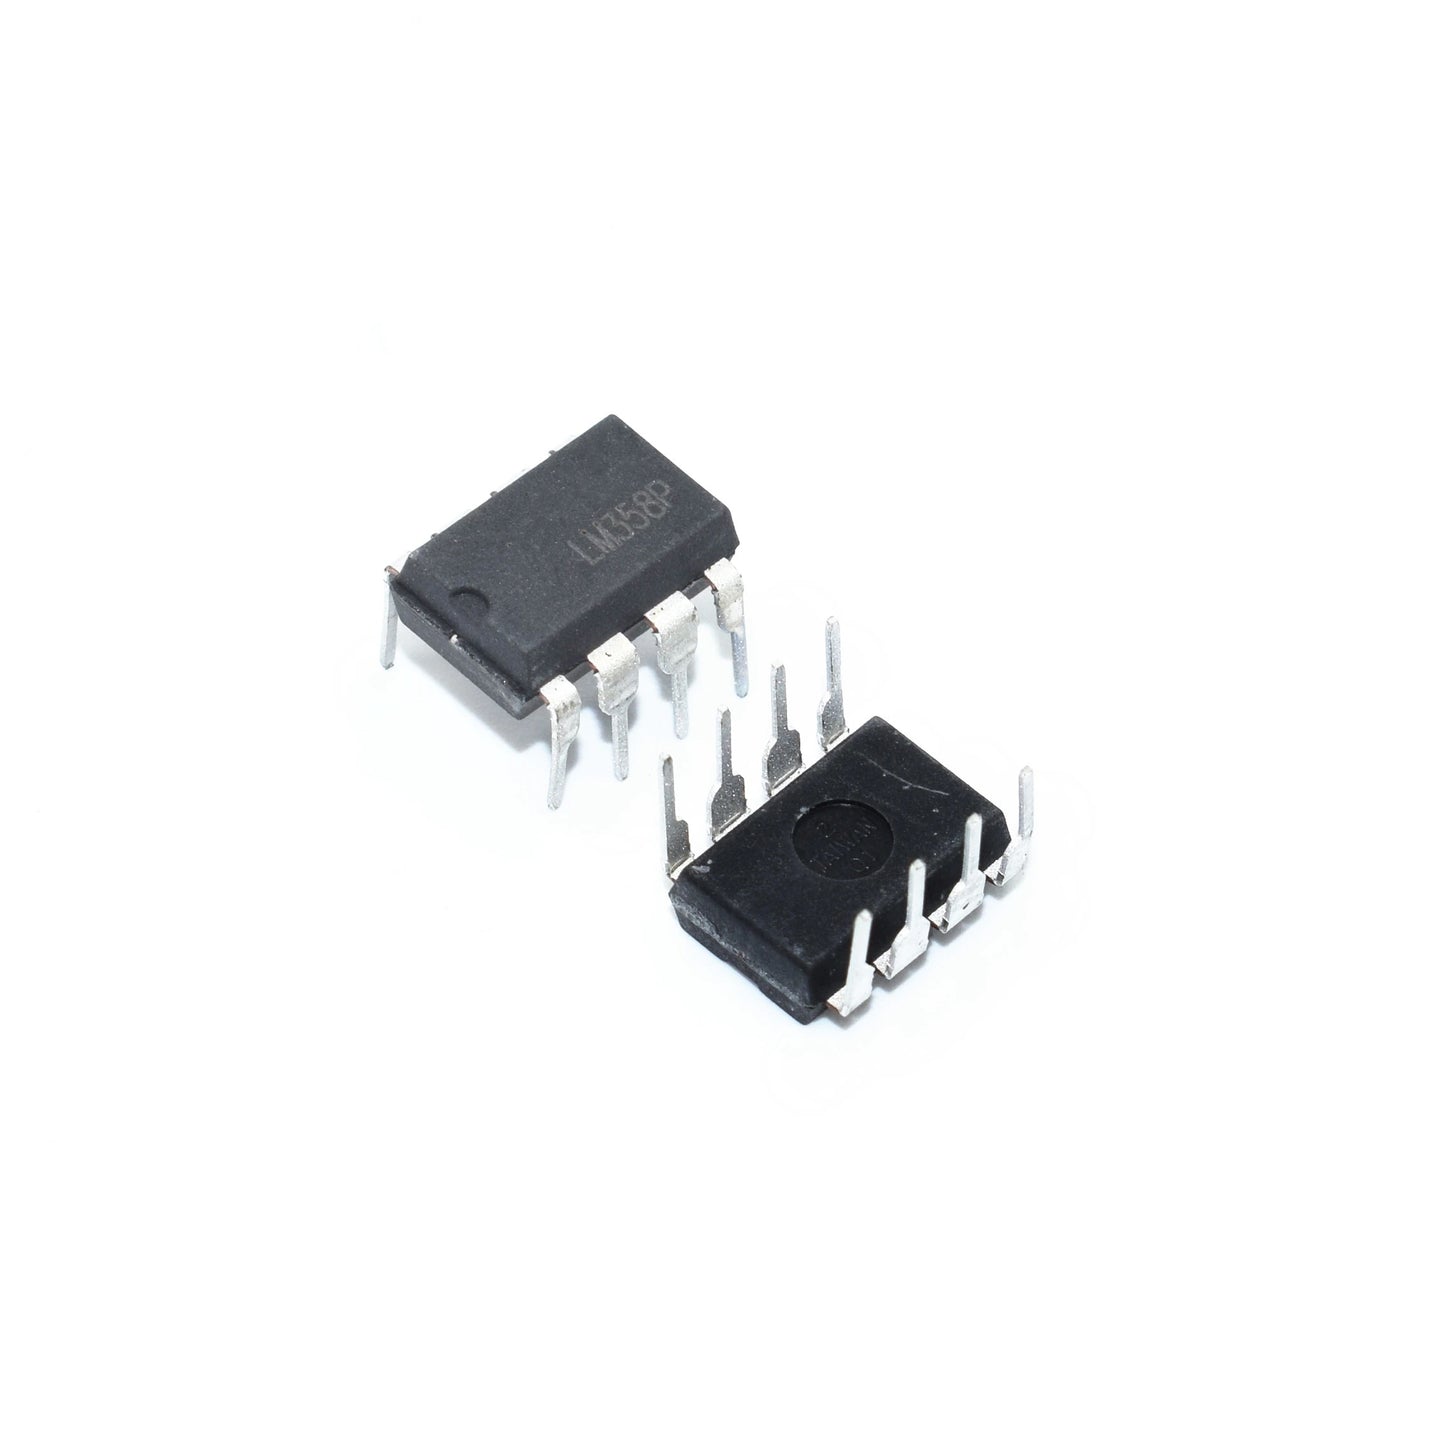 LM358P DUAL OPERATIONAL AMPLIFIER IC (10 pack)